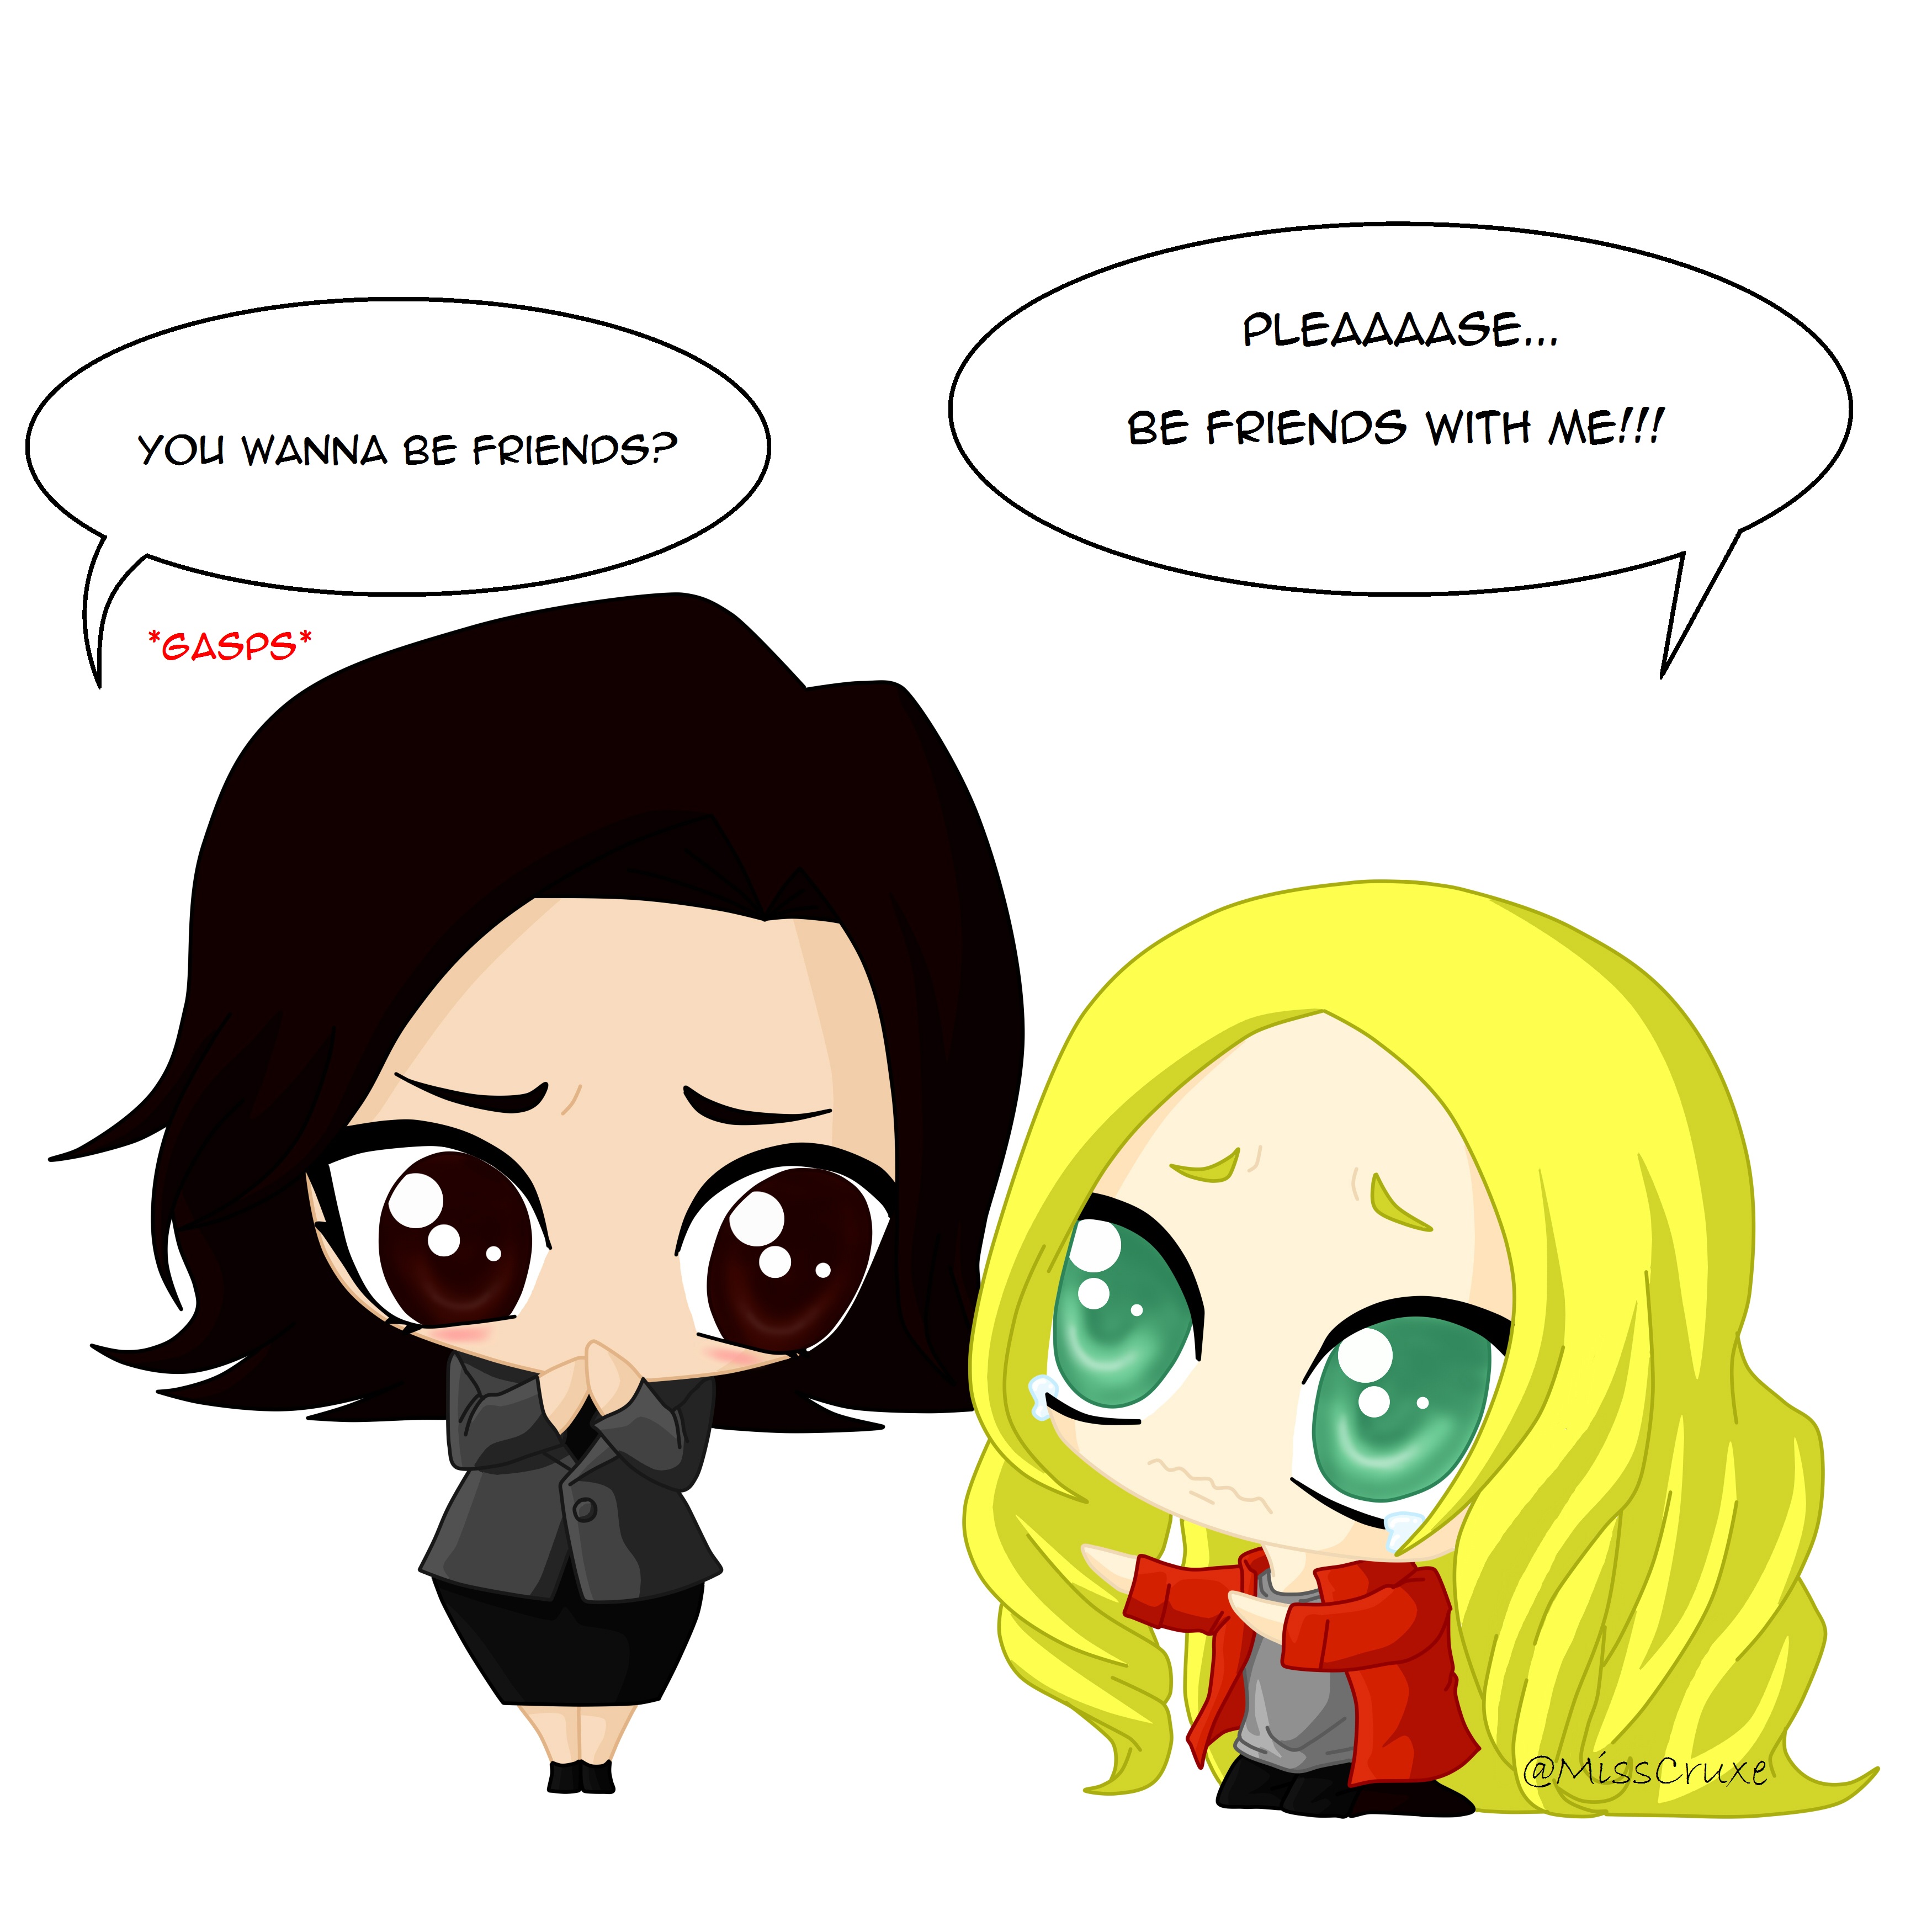 swanqueen___you_wanna_be_friends__by_selene_cruxe-d9dt5yt